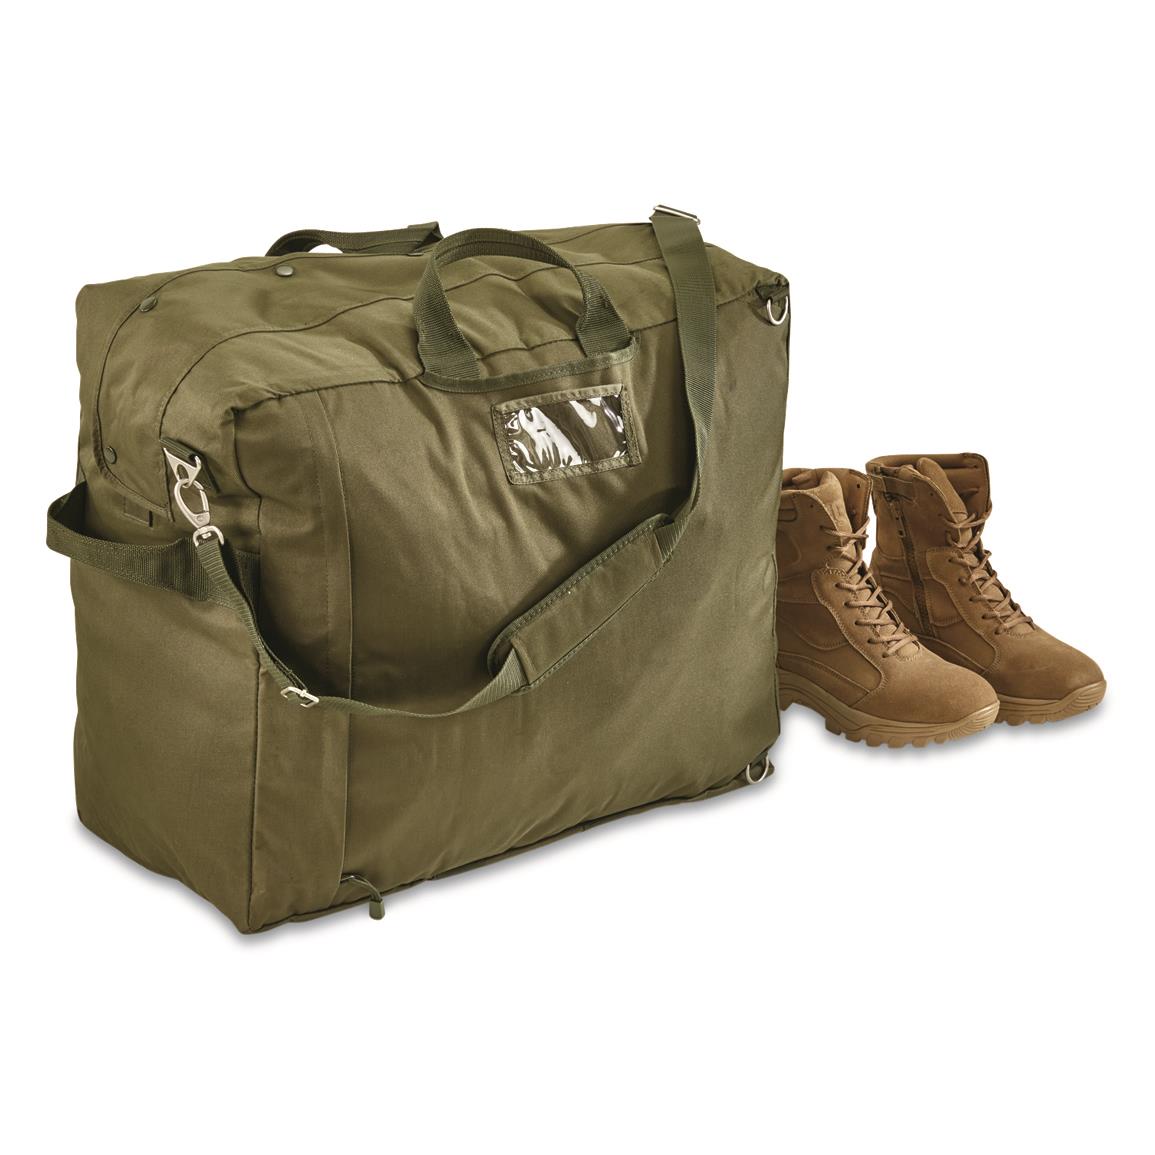 U.S. Municipal Surplus Kit Bag with Backpack Straps, New, Olive Drab